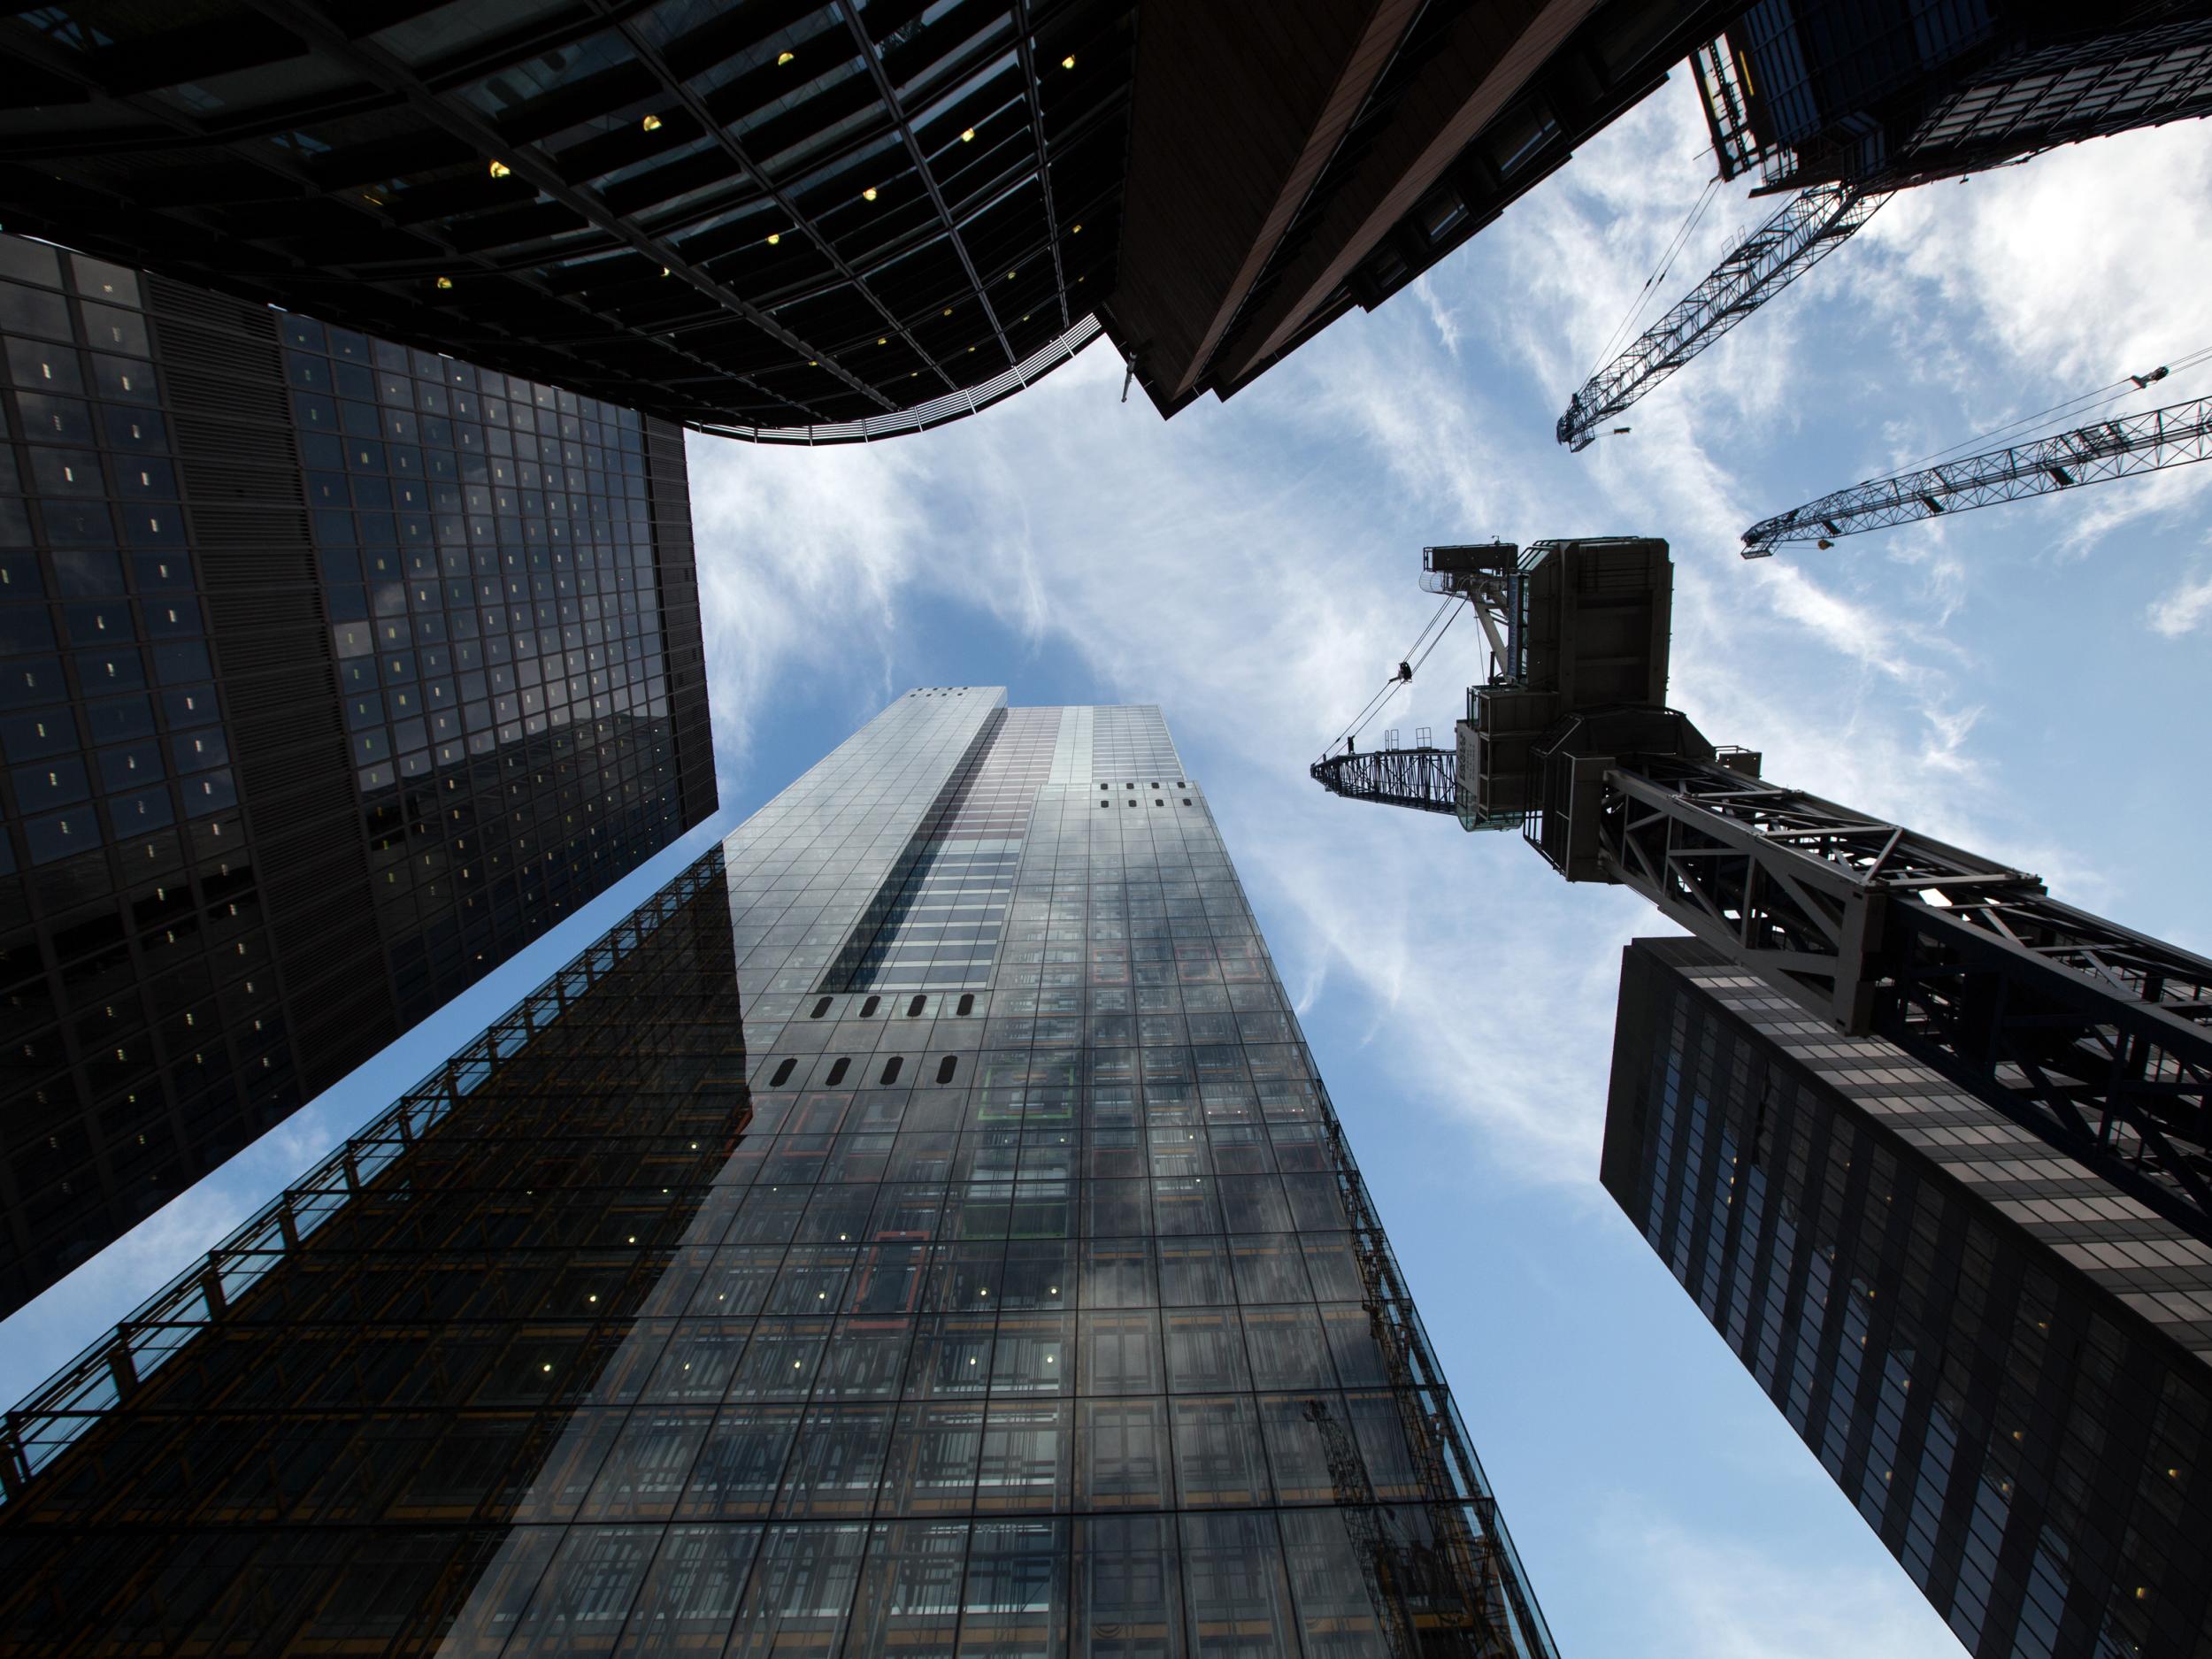 The number of empty offices is on the rise as well as fewer new construction projects